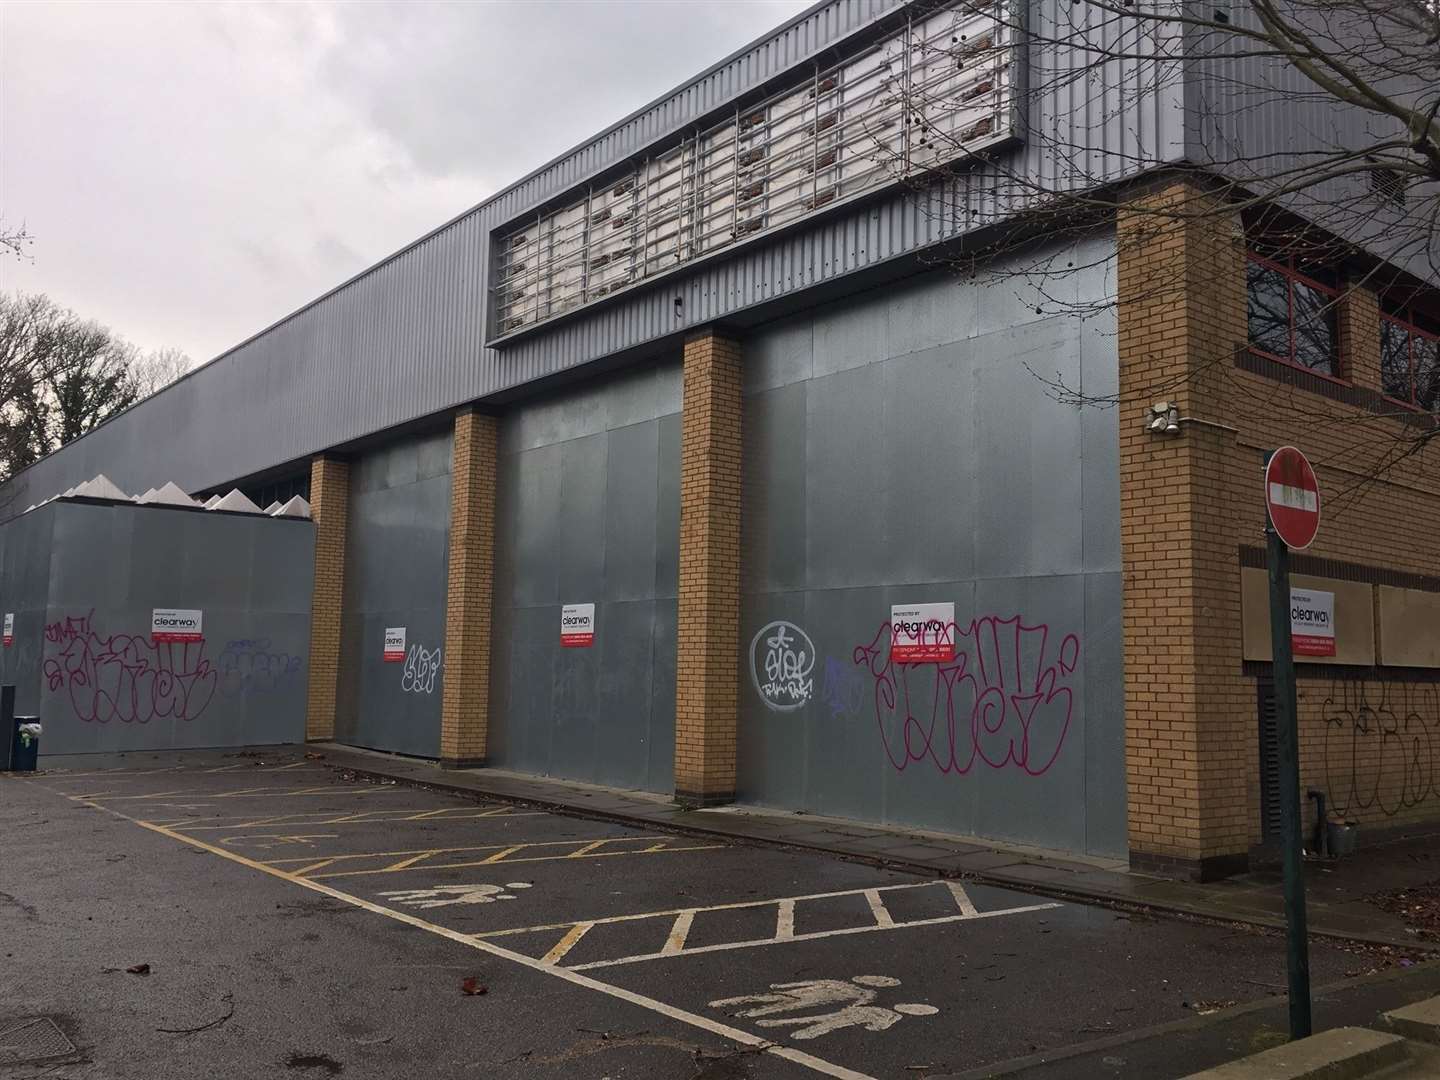 The old Homebase store is currently disused